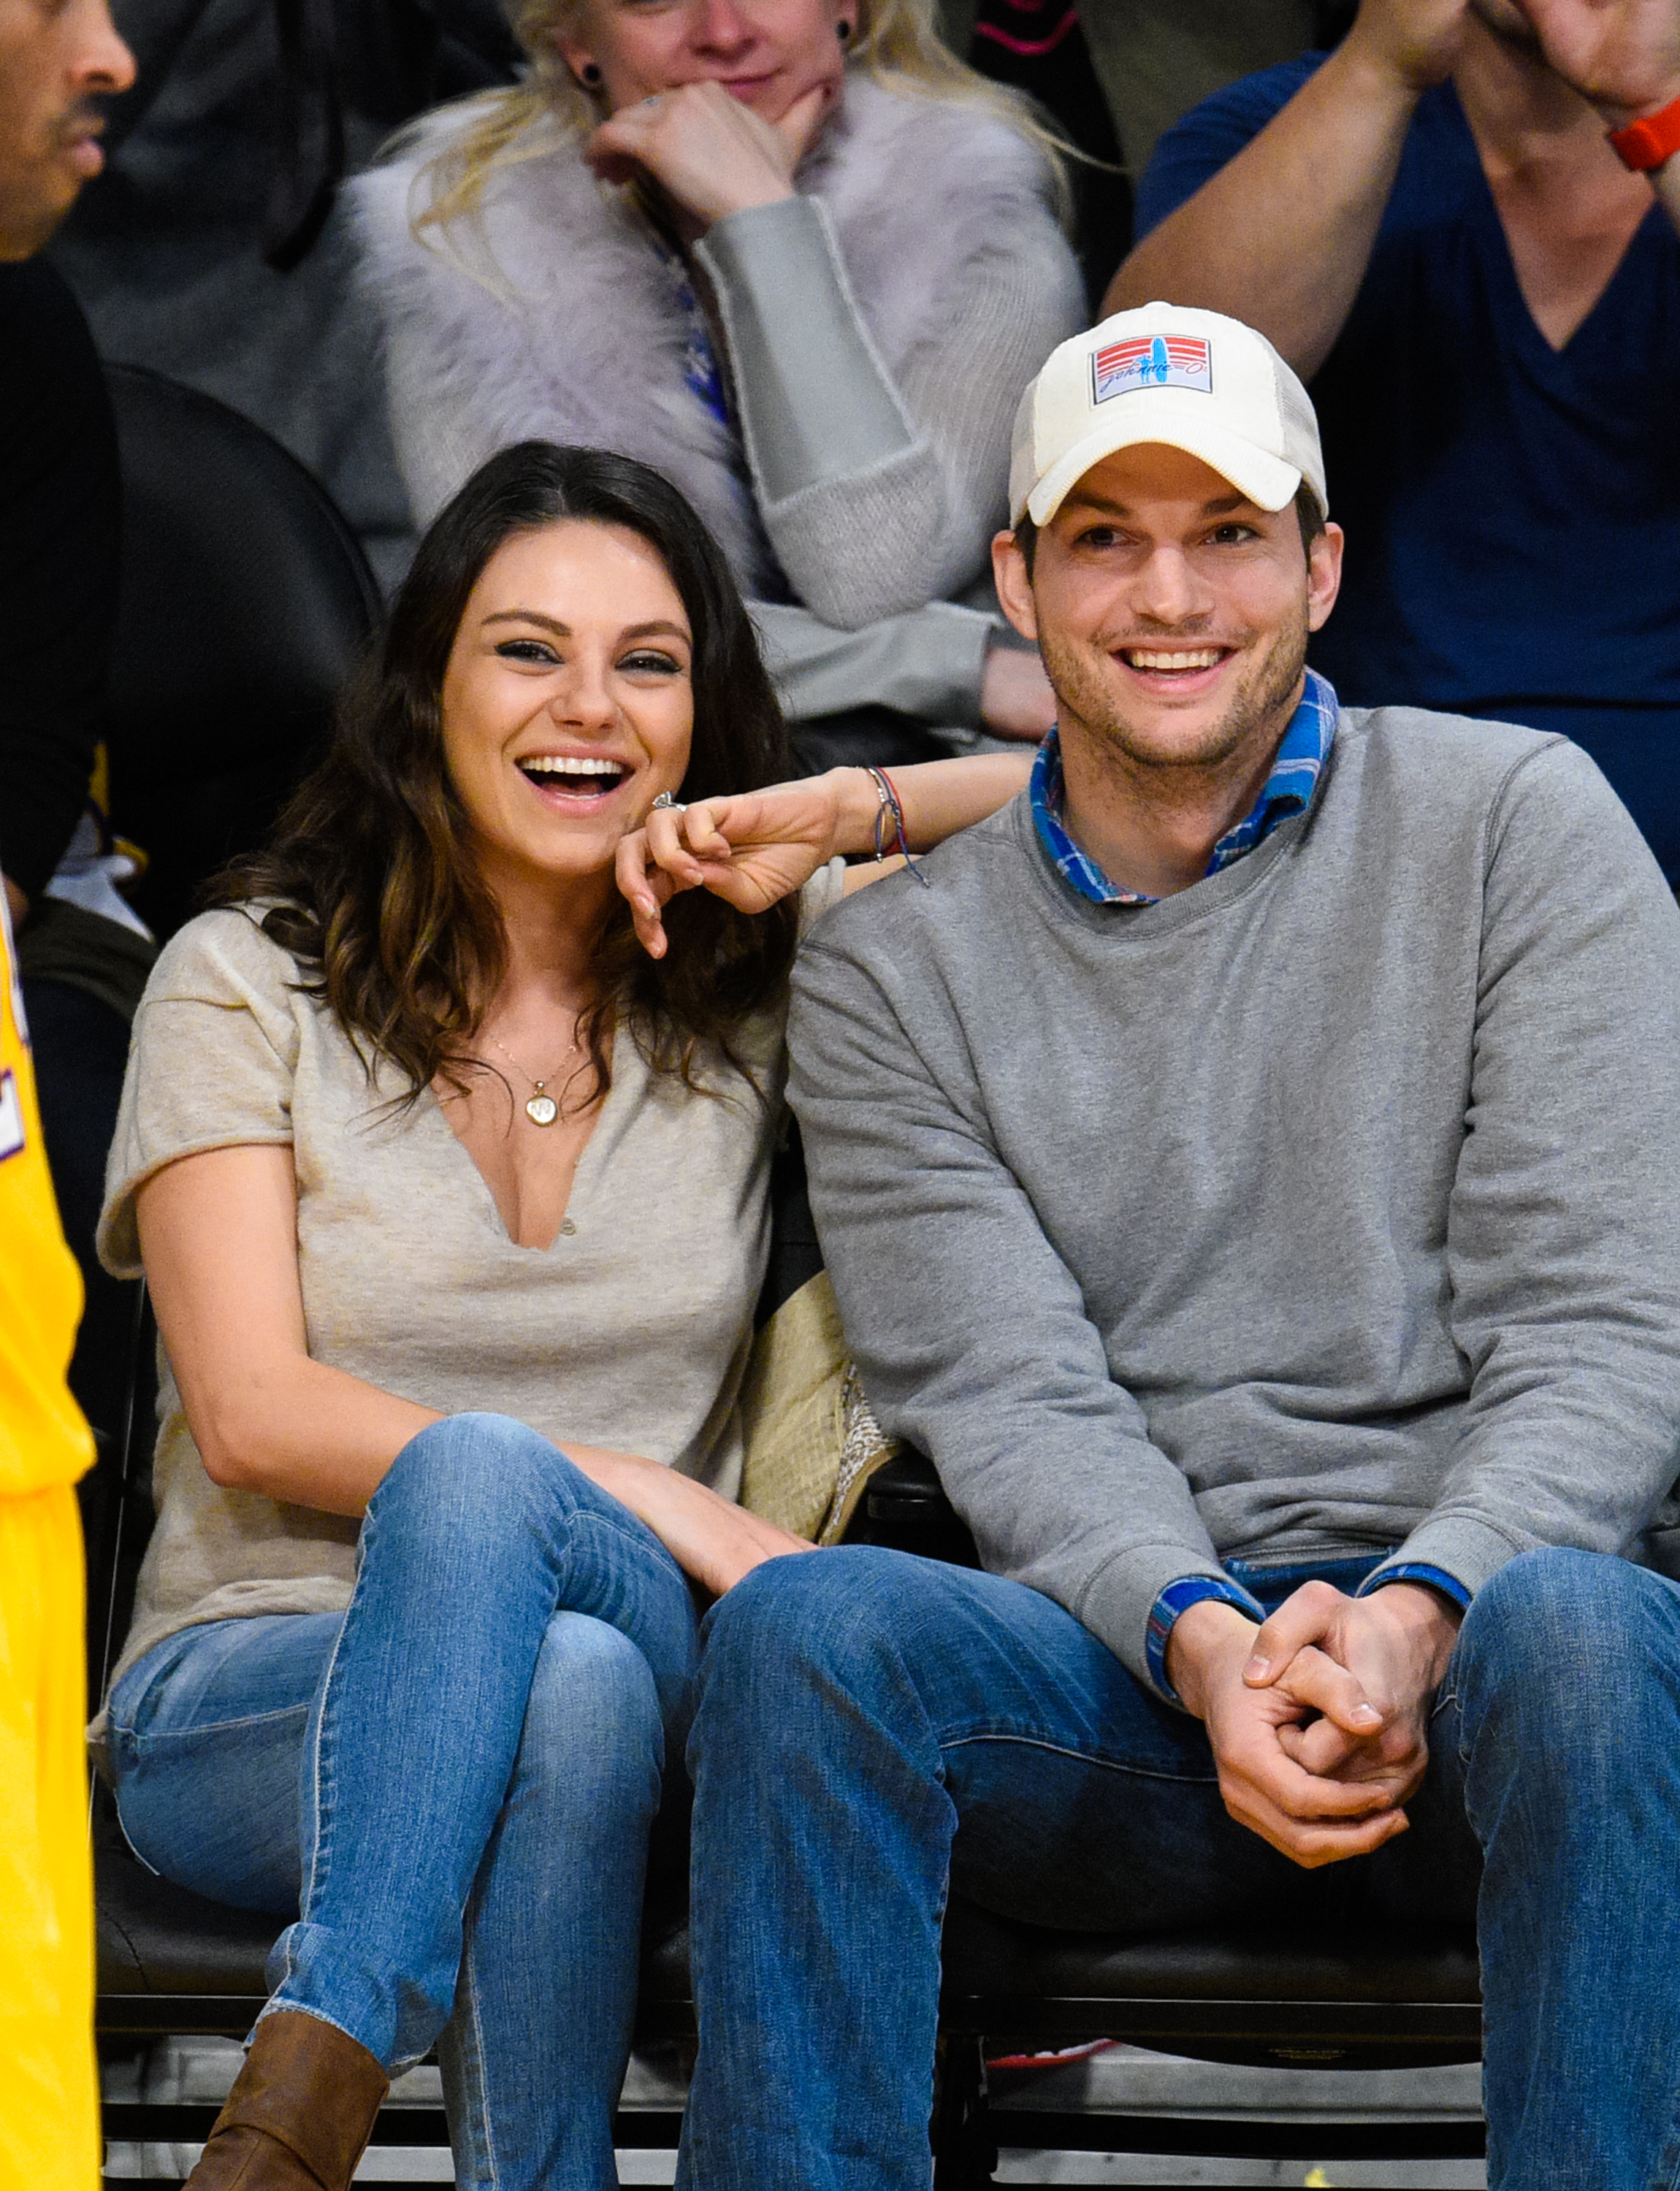 Mila Kunis and Ashton Kutcher at a basketball game between the Oklahoma City Thunder and Los Angeles Lakers on December 19, 2014, in Los Angeles, California. | Source: Getty Images